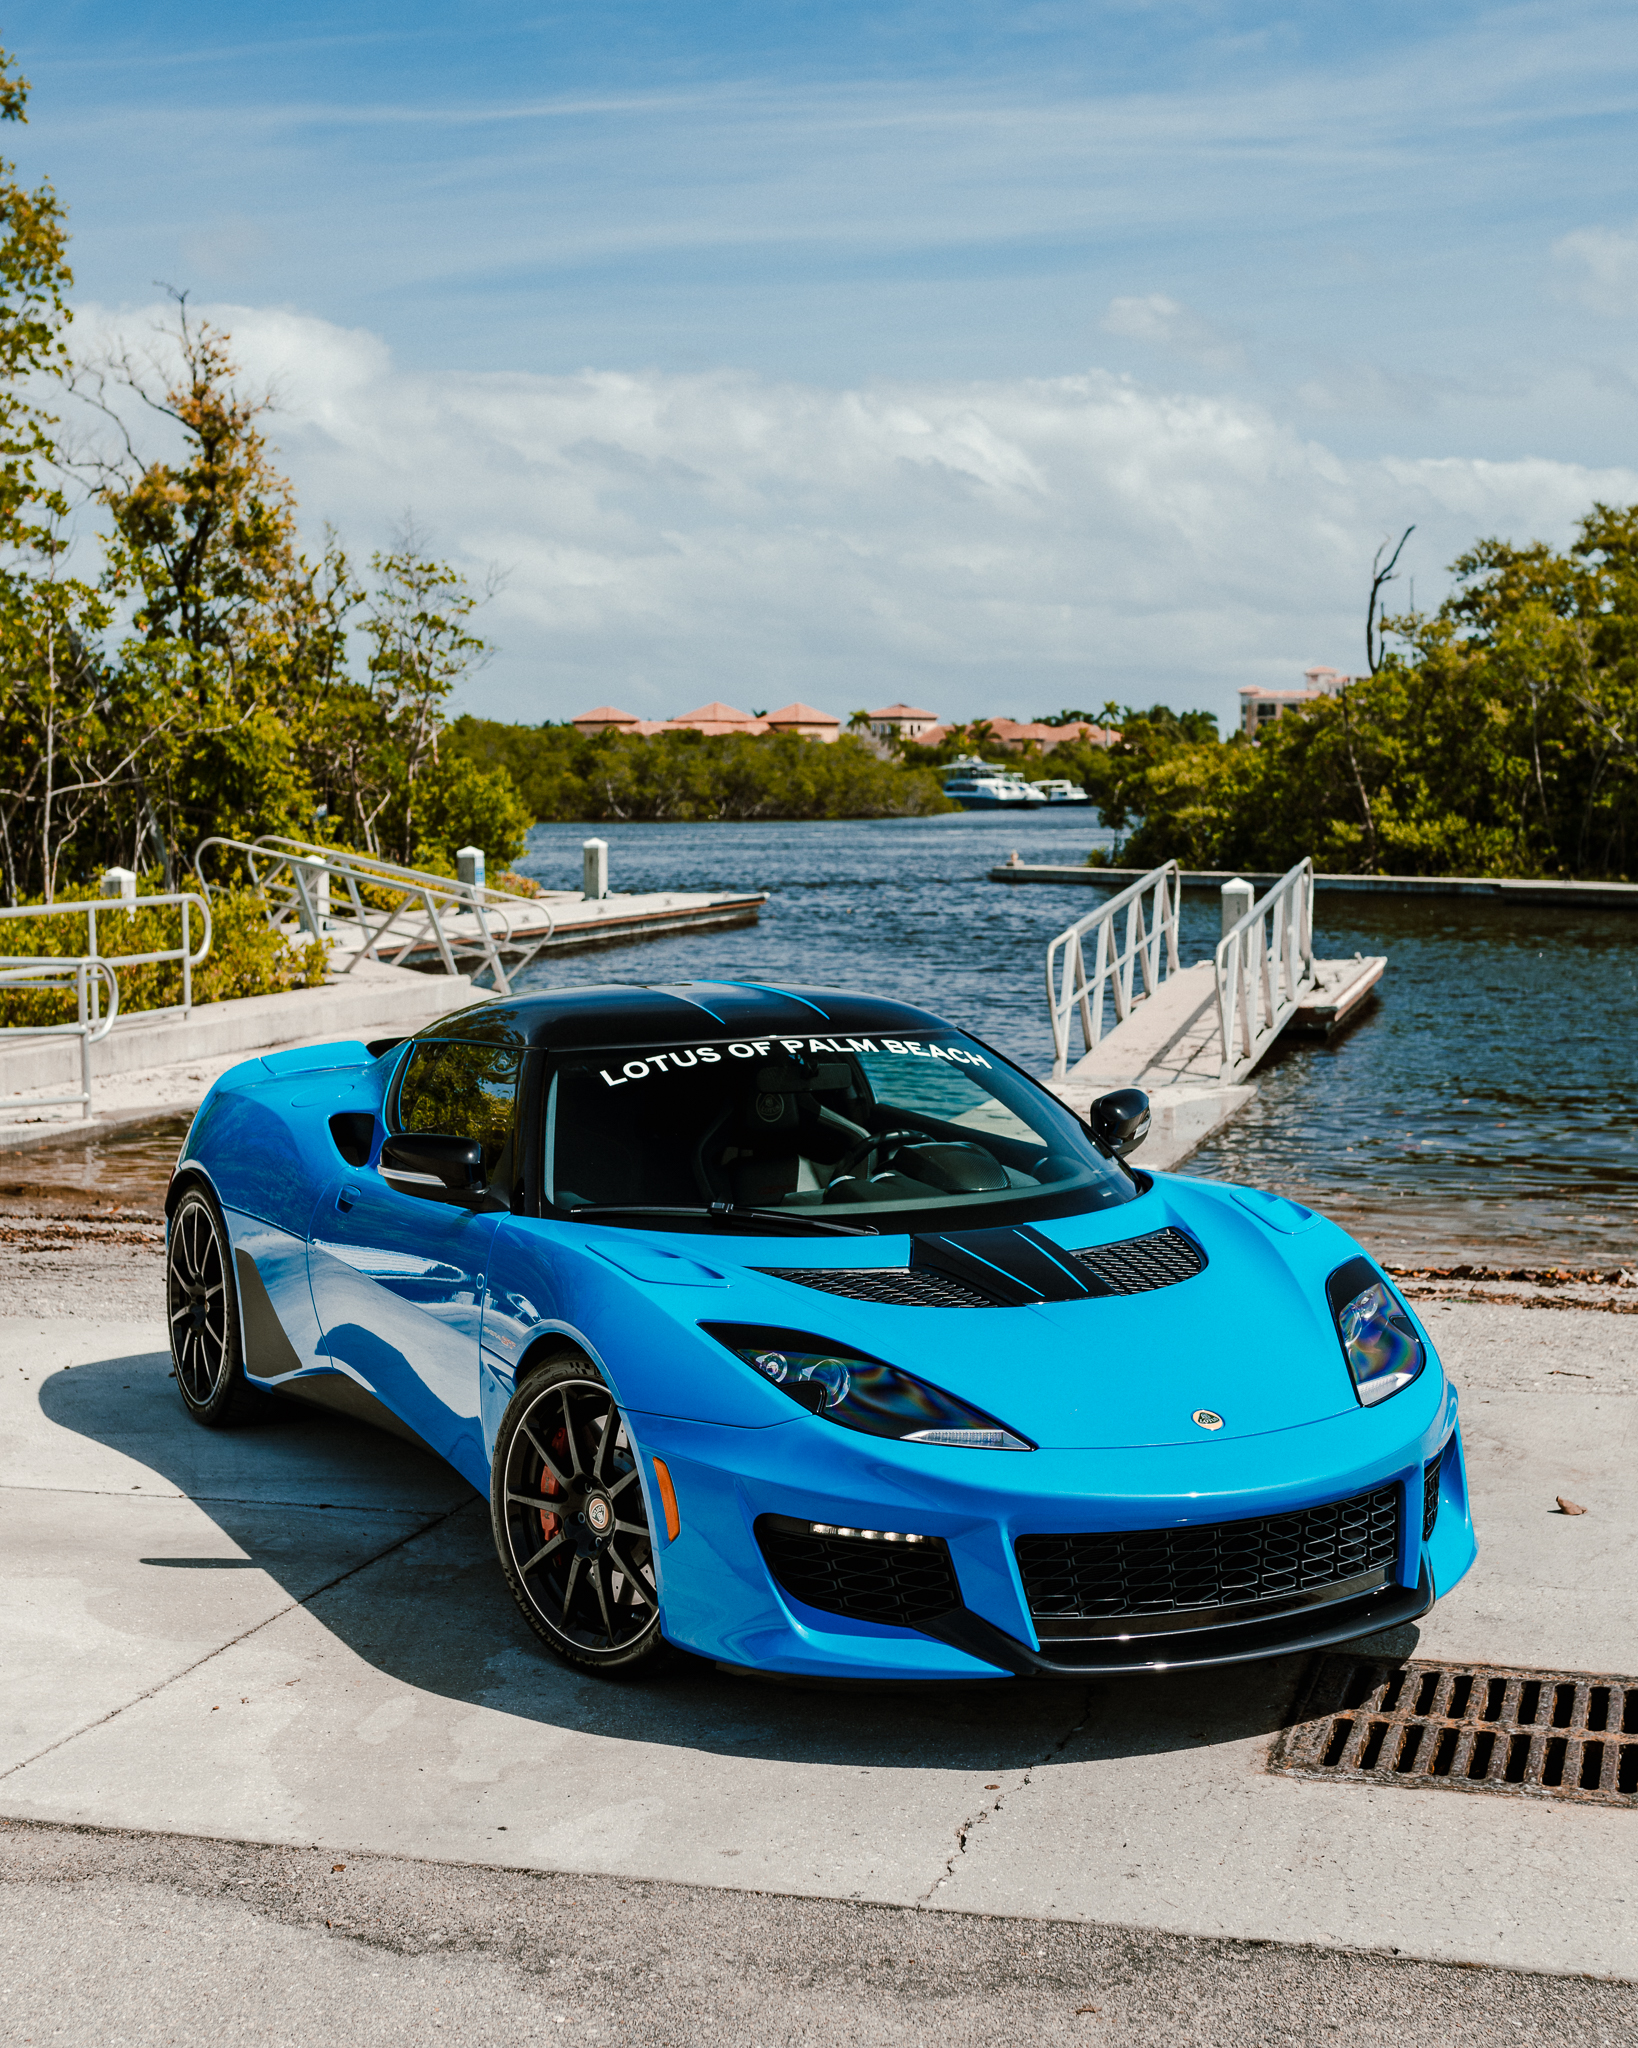 Lotus for sale near Fort Myers